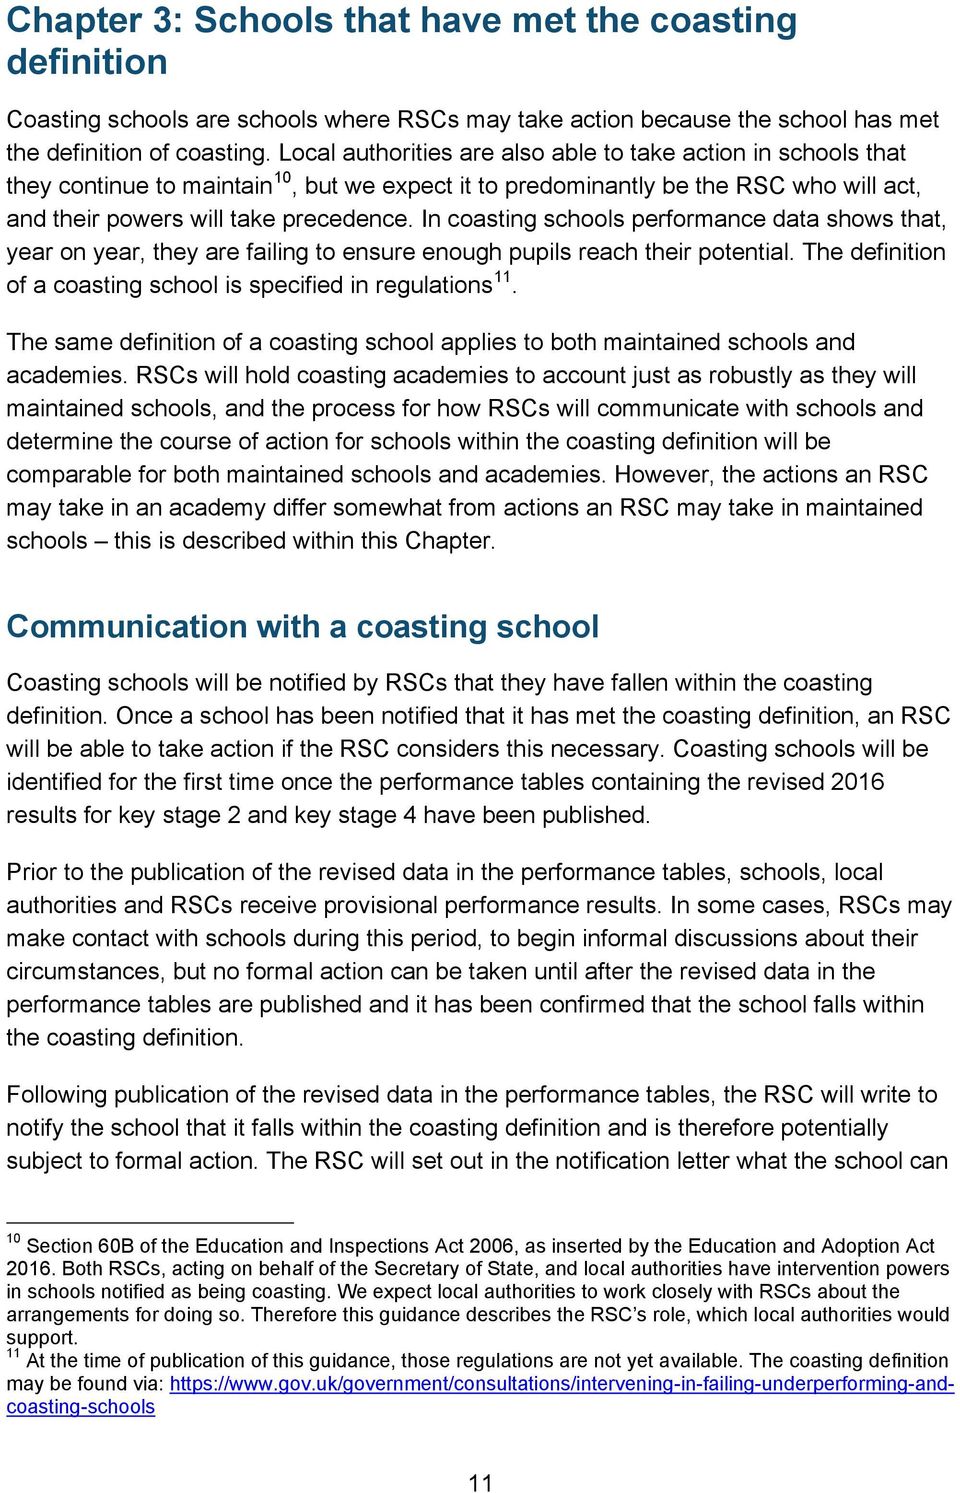 In coasting schools performance data shows that, year on year, they are failing to ensure enough pupils reach their potential. The definition of a coasting school is specified in regulations 11.